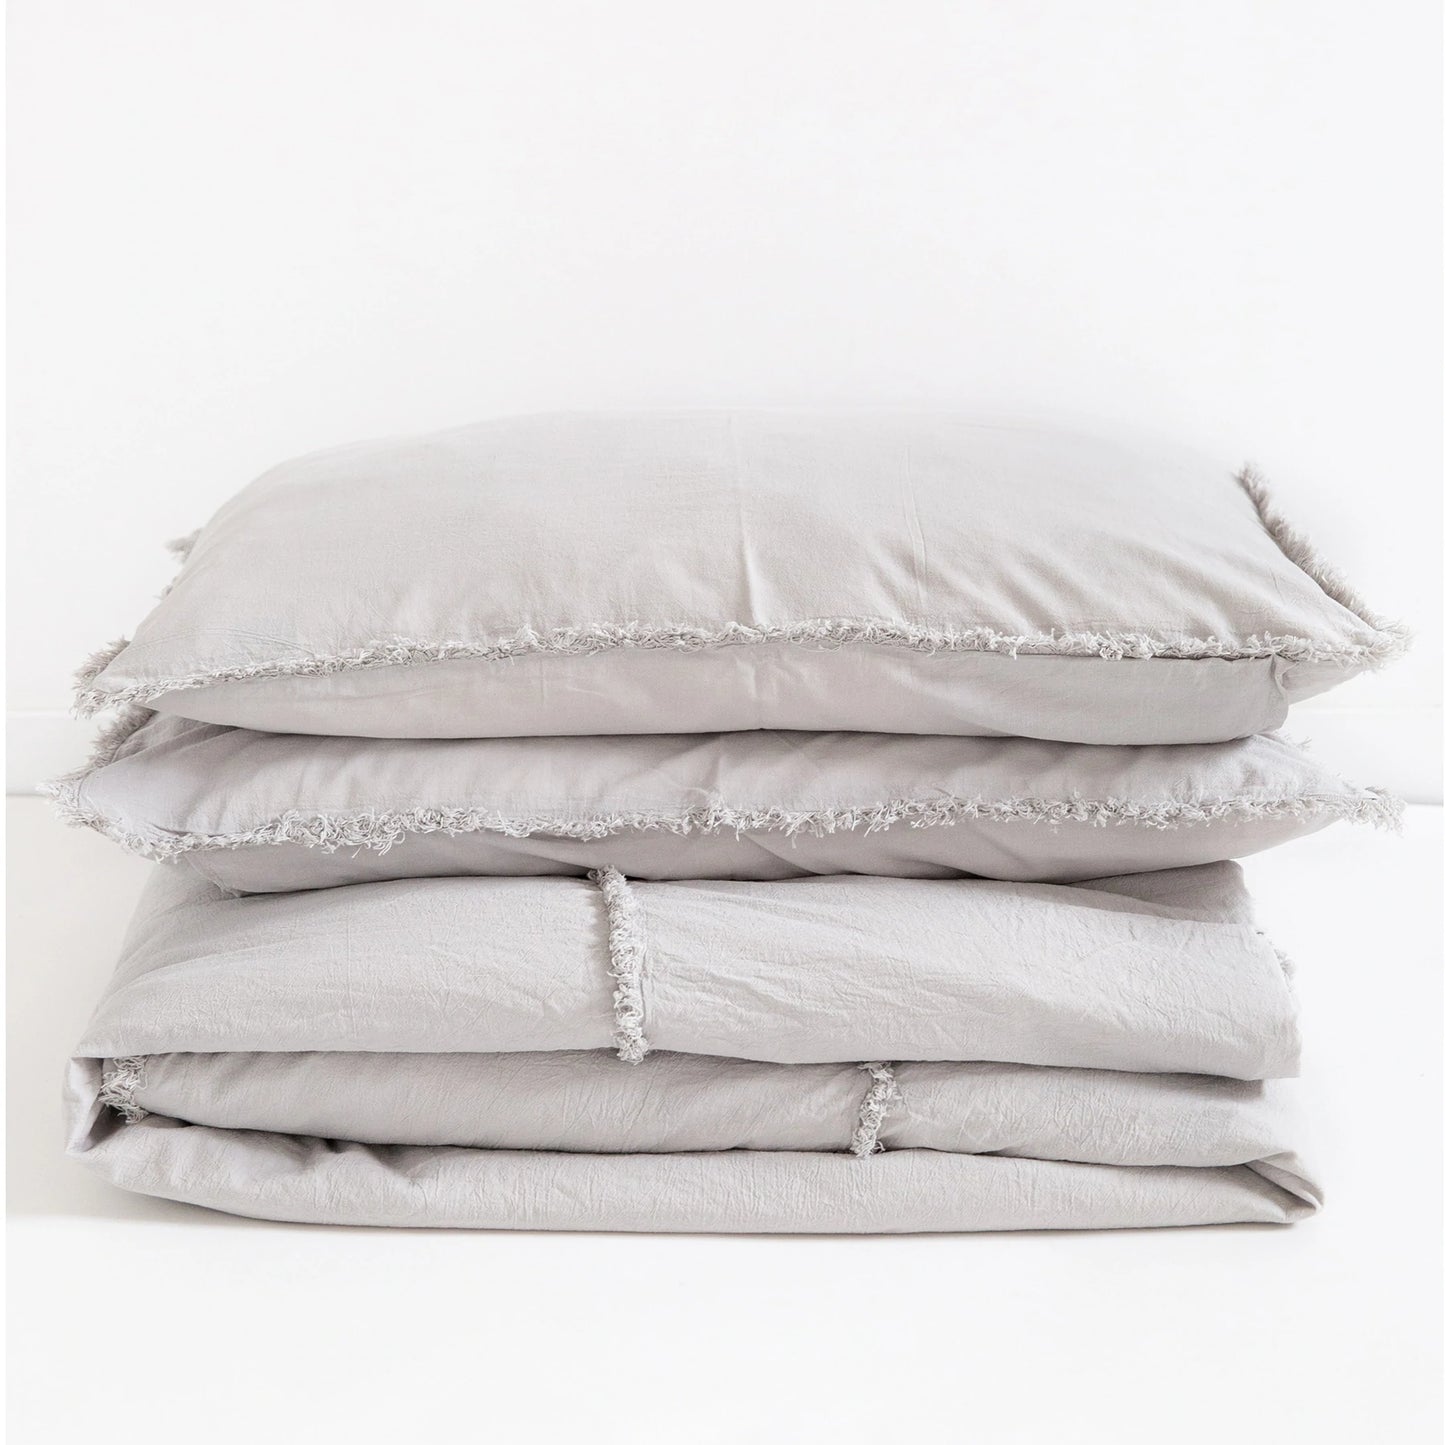 The Eve Duvet Set - Queen Size - Optic White, Stone Grey - wild and heart